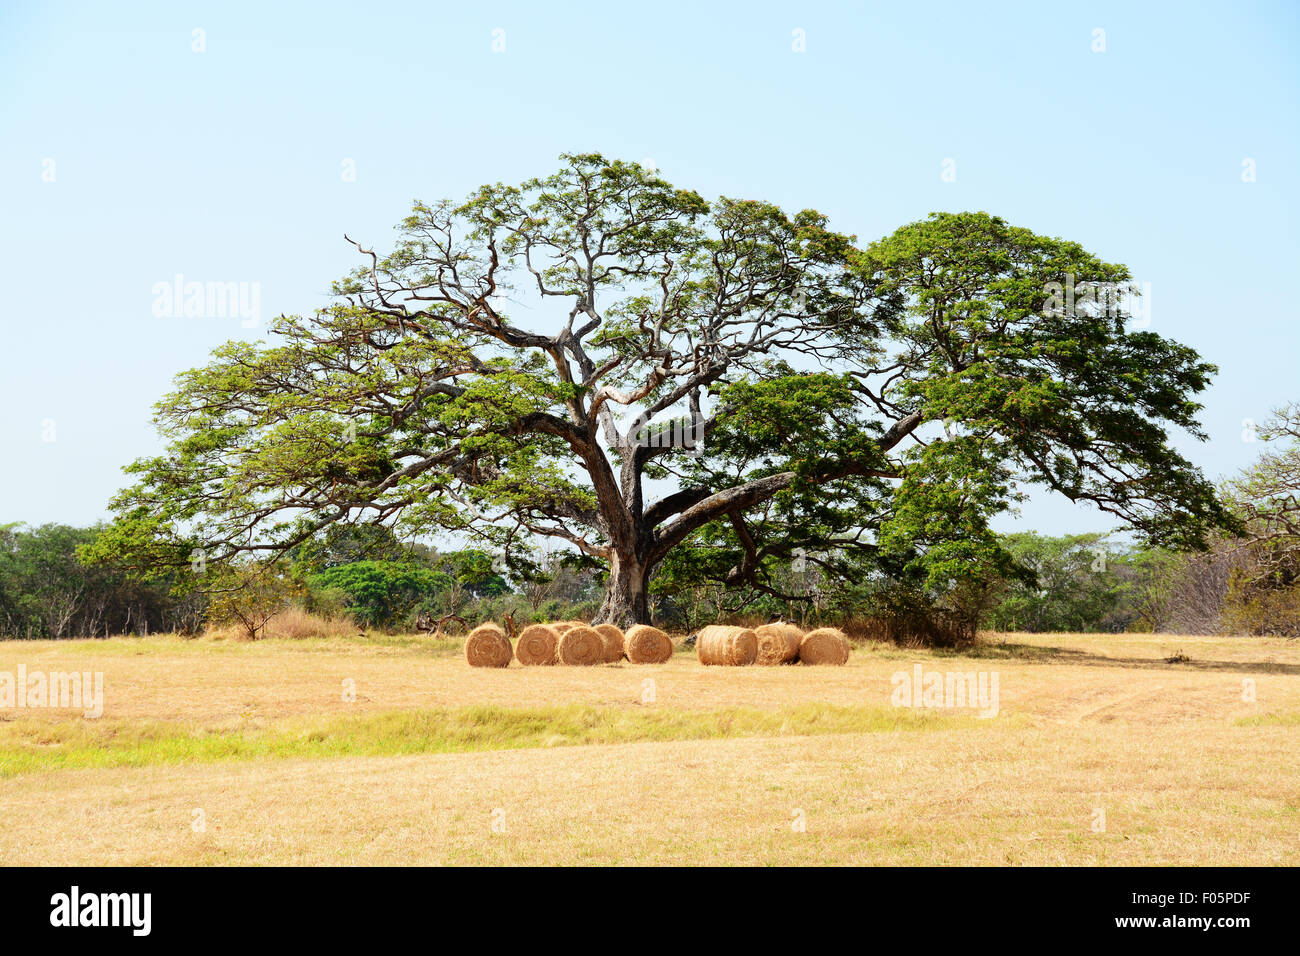 Huge tree with hay bales under it at a pasture field Stock Photo